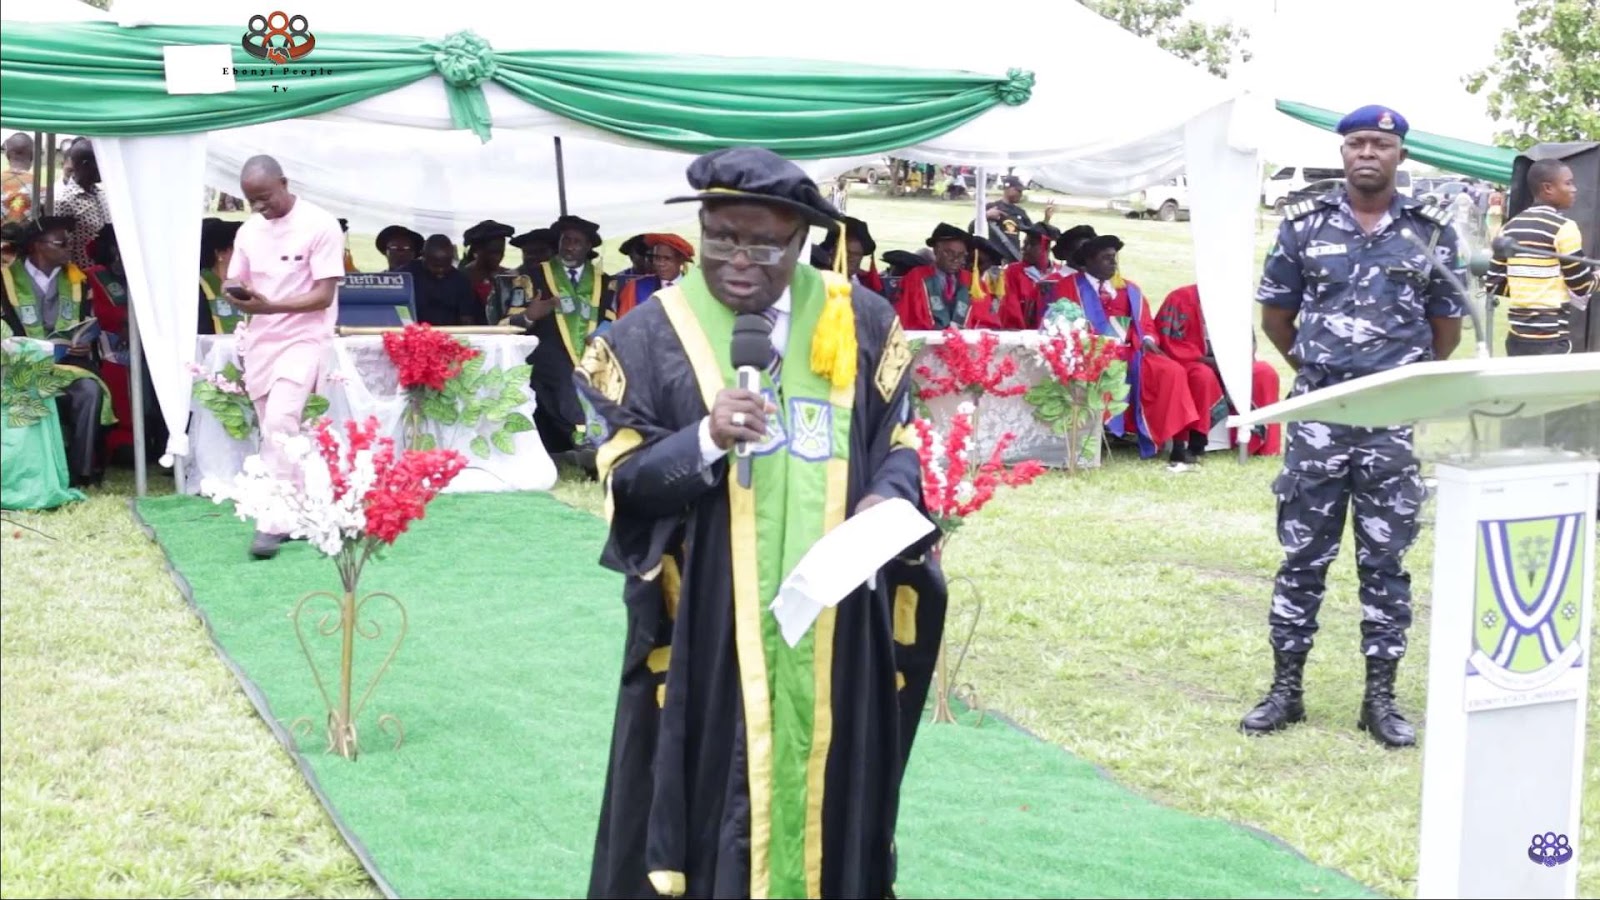 The Ebonyi State University is hosting their 2022 matriculation